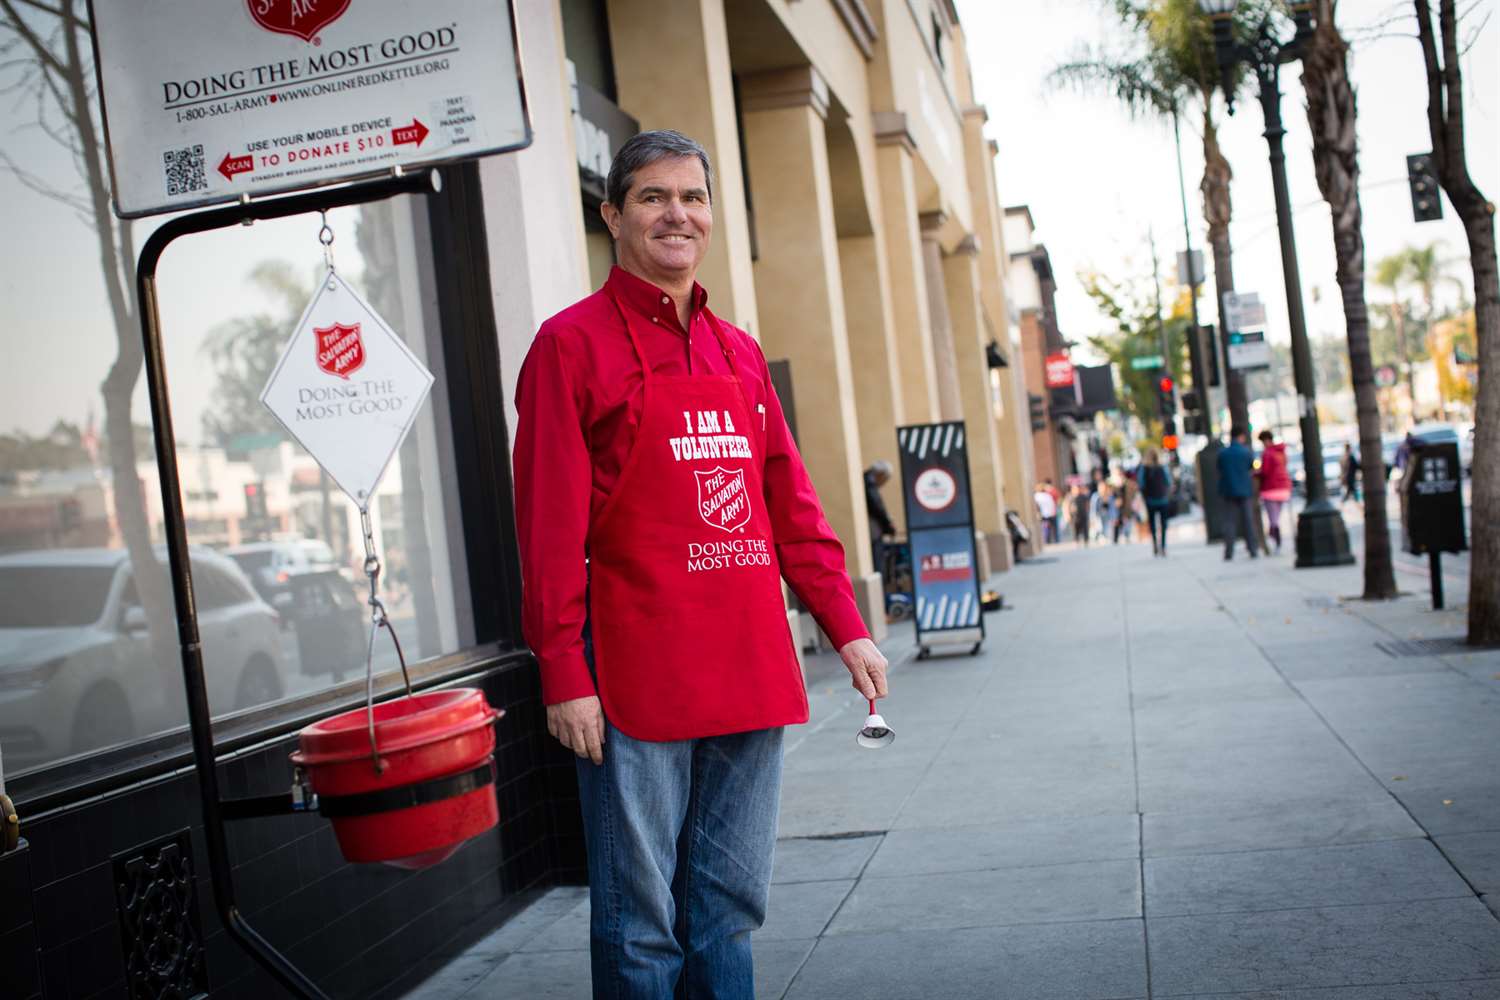 salvation army red kettle worker.jpg